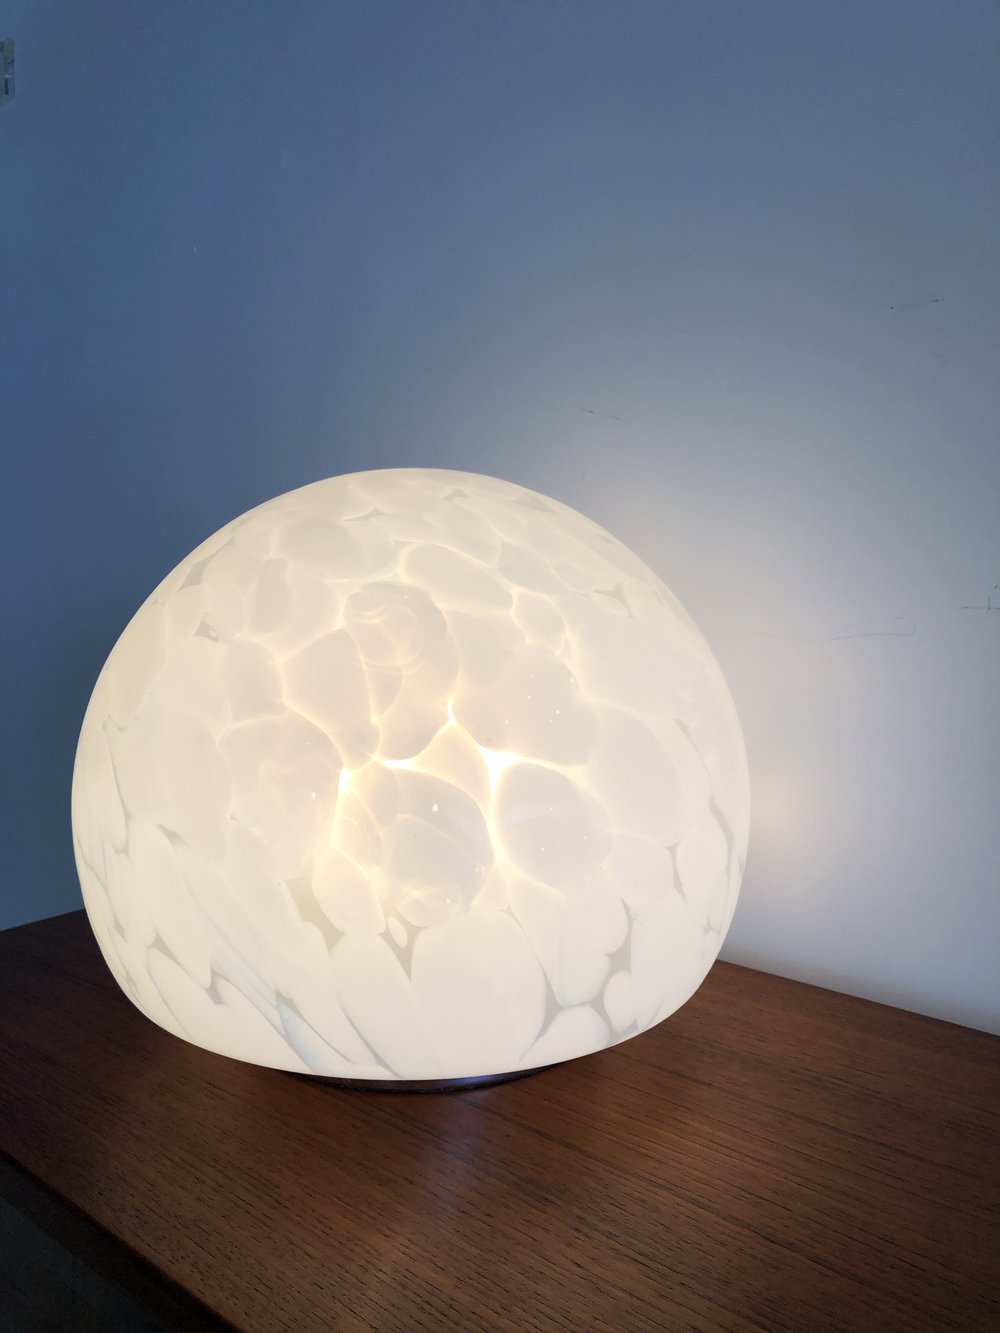 Vintage 1970s Murano Glass Speckled Orb Table Lamp